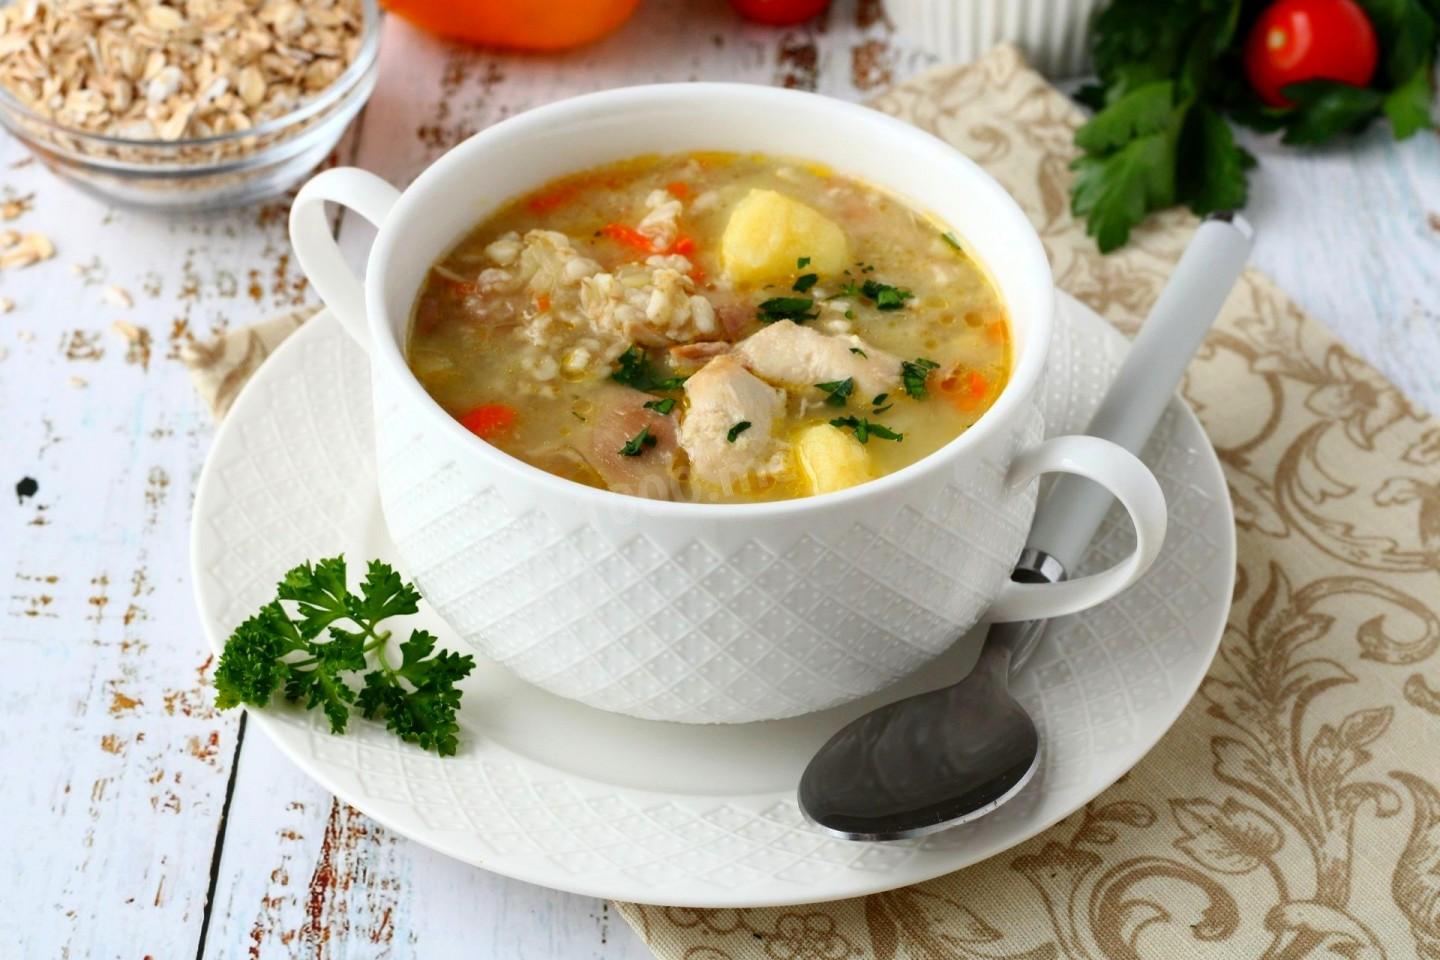 peasants soup on a plate next to a spoon on a table